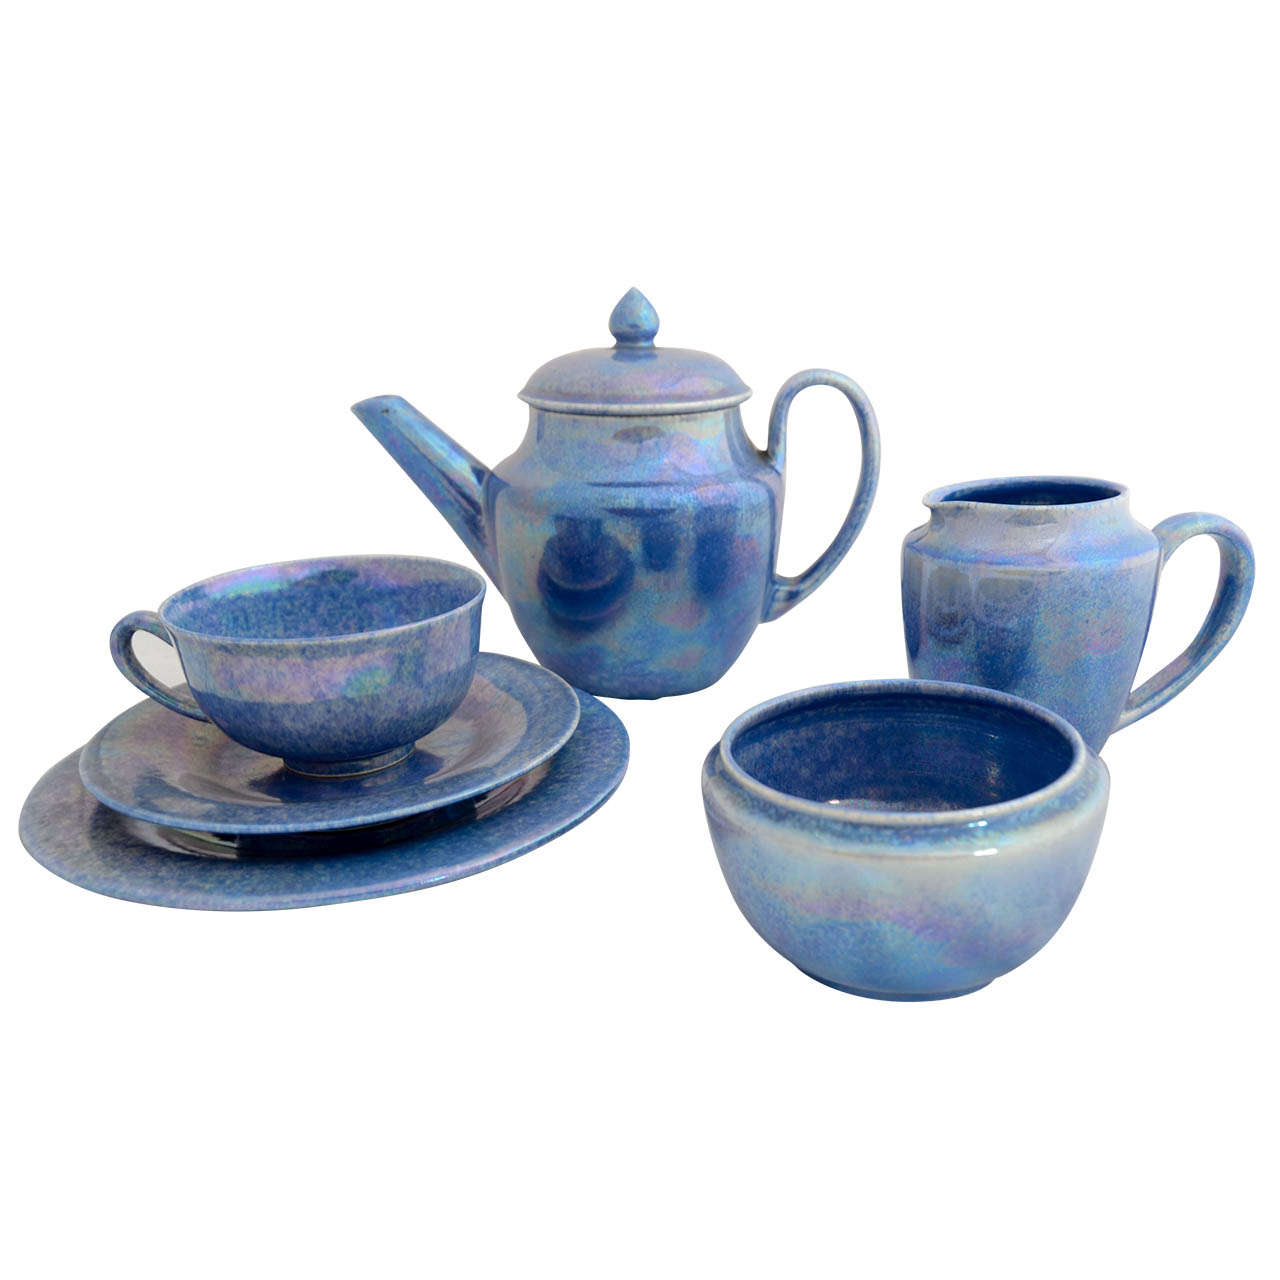 6 Piece Blue Lustreware Tea Set by The Ruskin Pottery, England 1927 For Sale